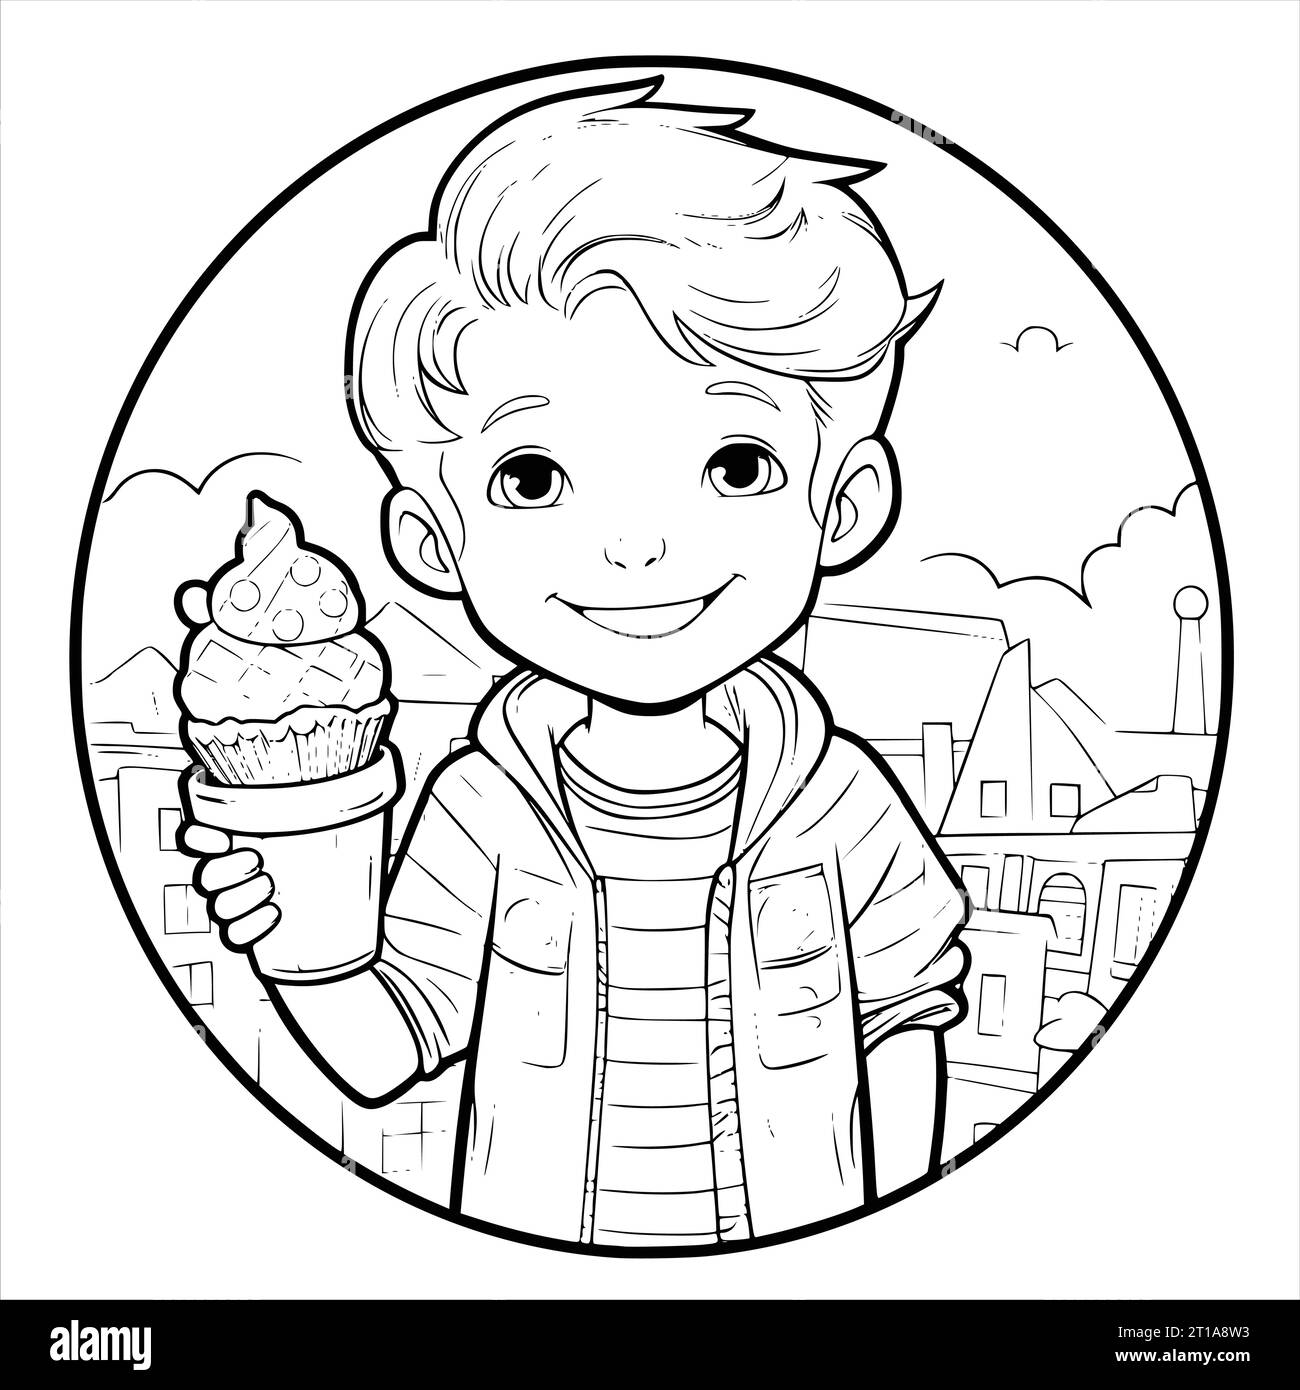 Boy Holding Ice Cream Coloring Page For Kids Stock Vector